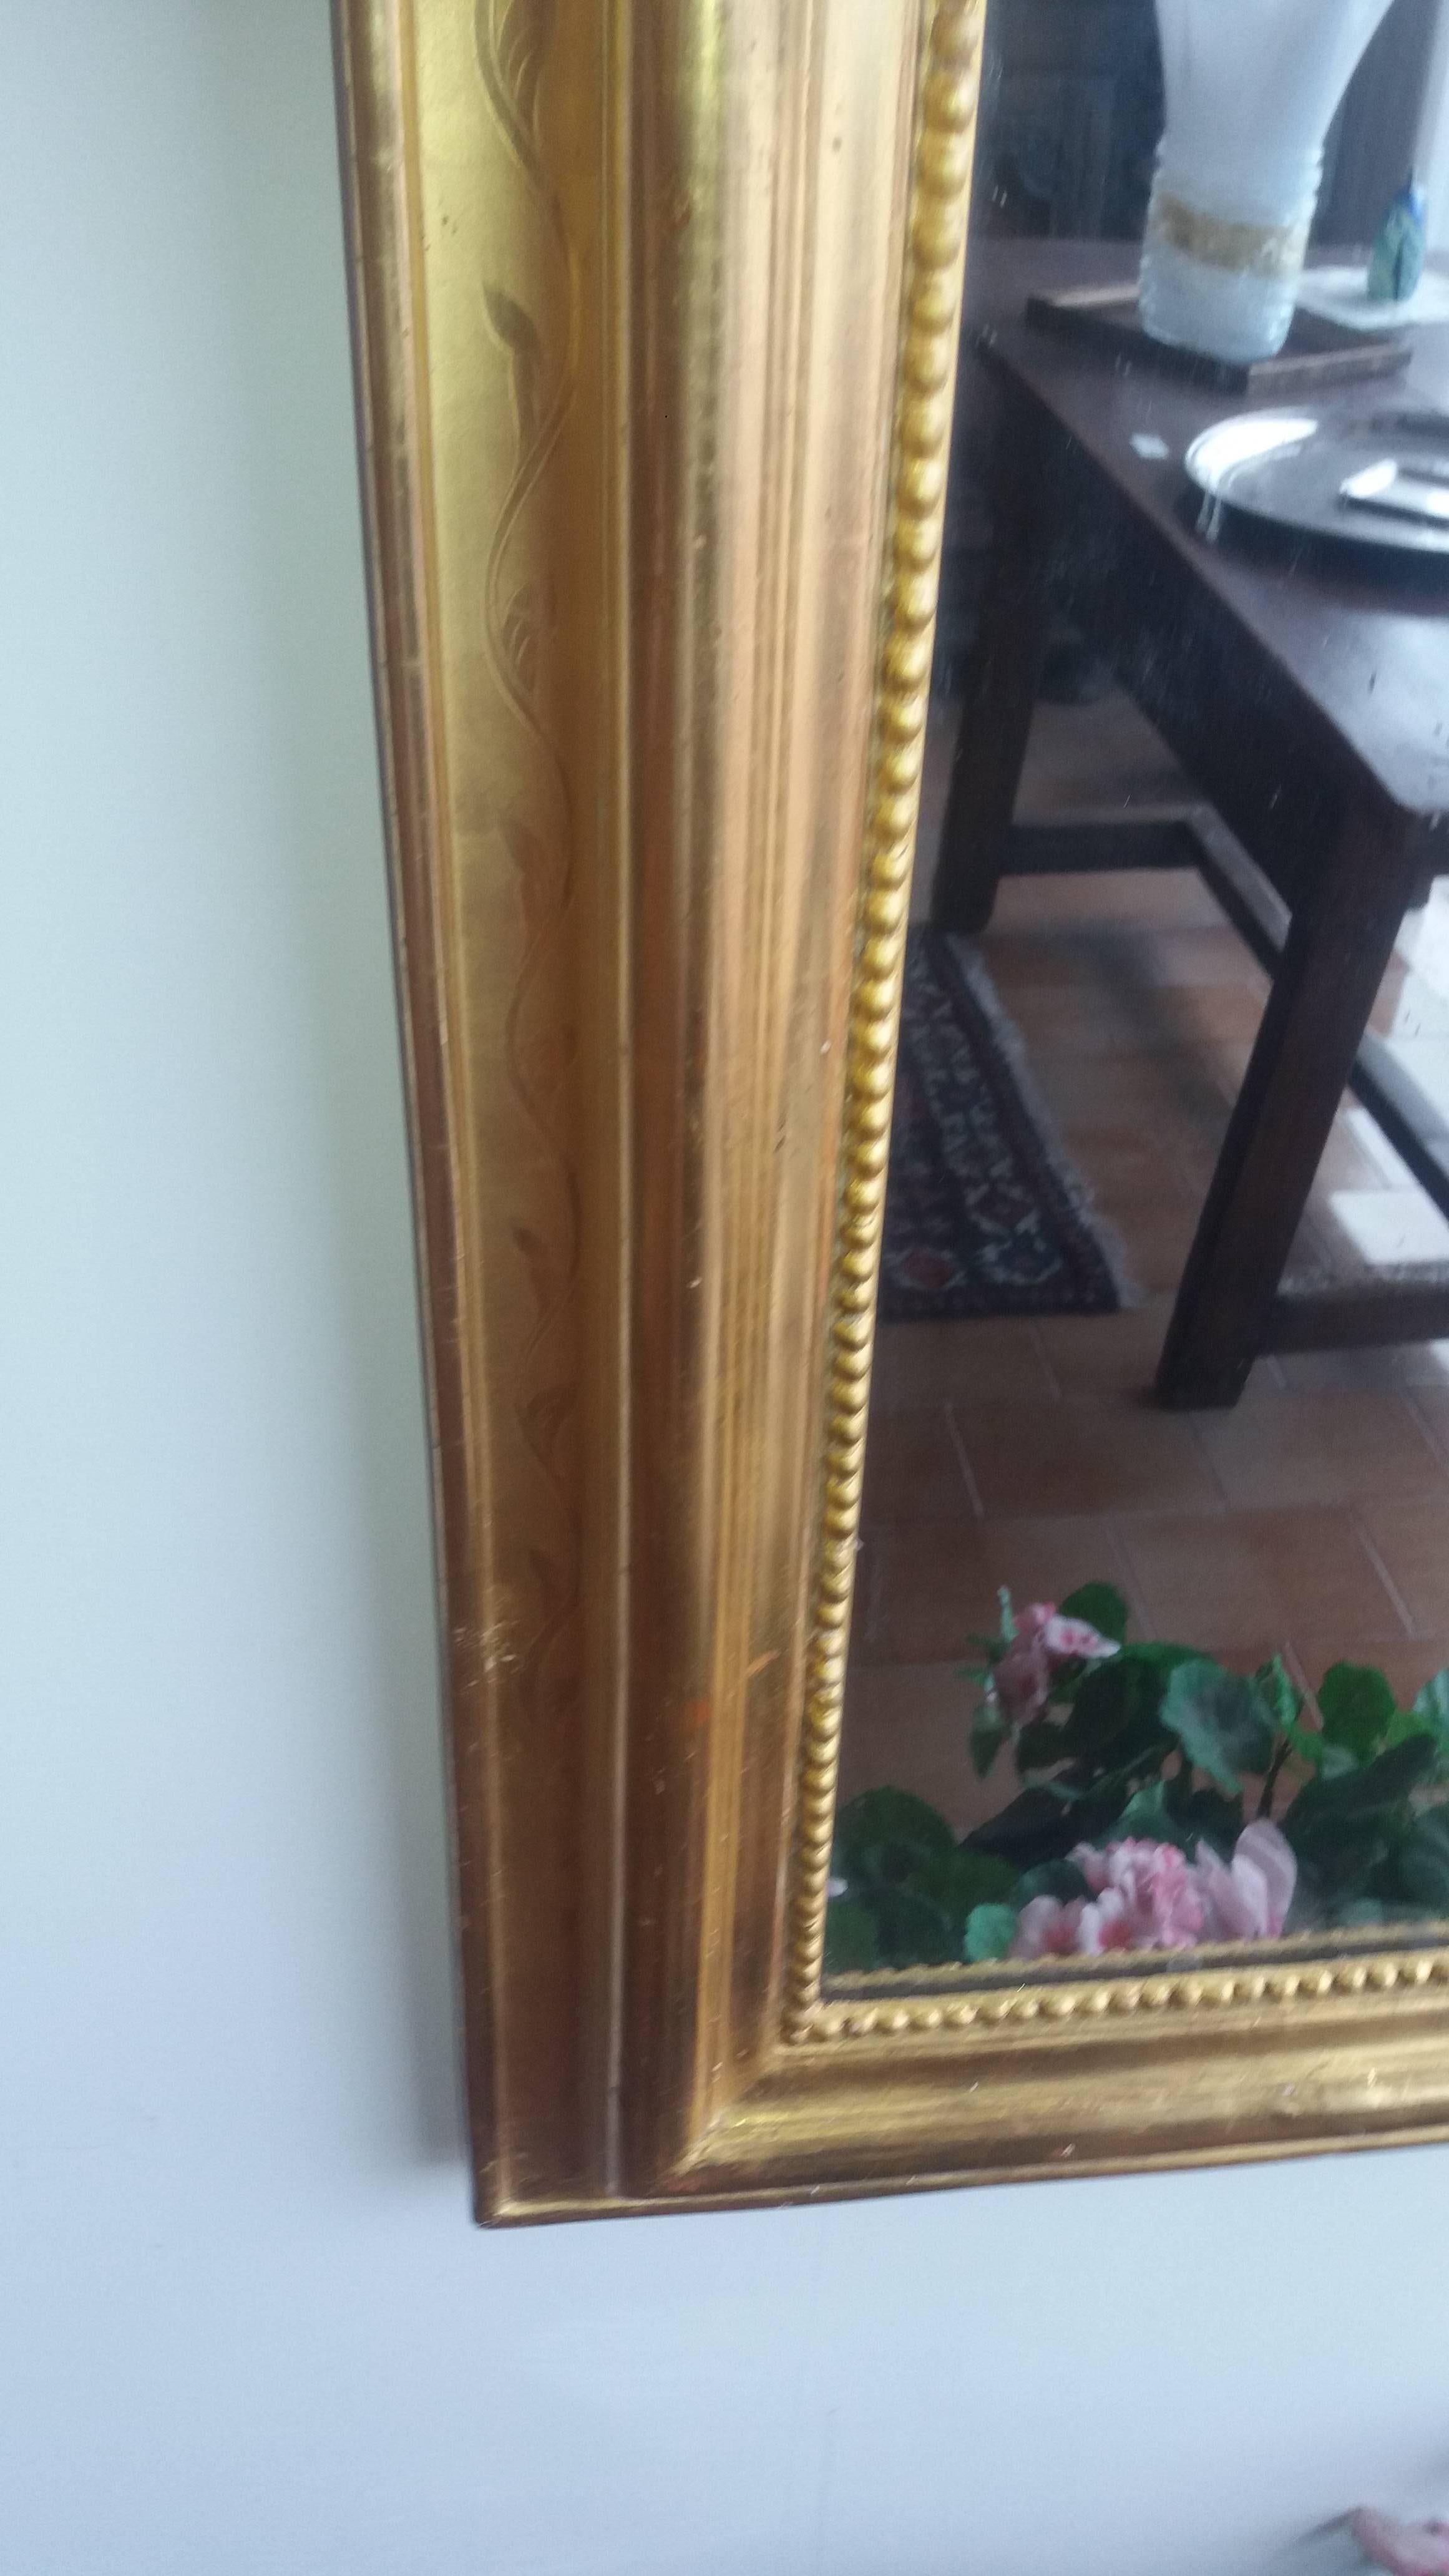 19th century gold wood and plaster mirror.
Measure: 136 cm height and 85 cm width.